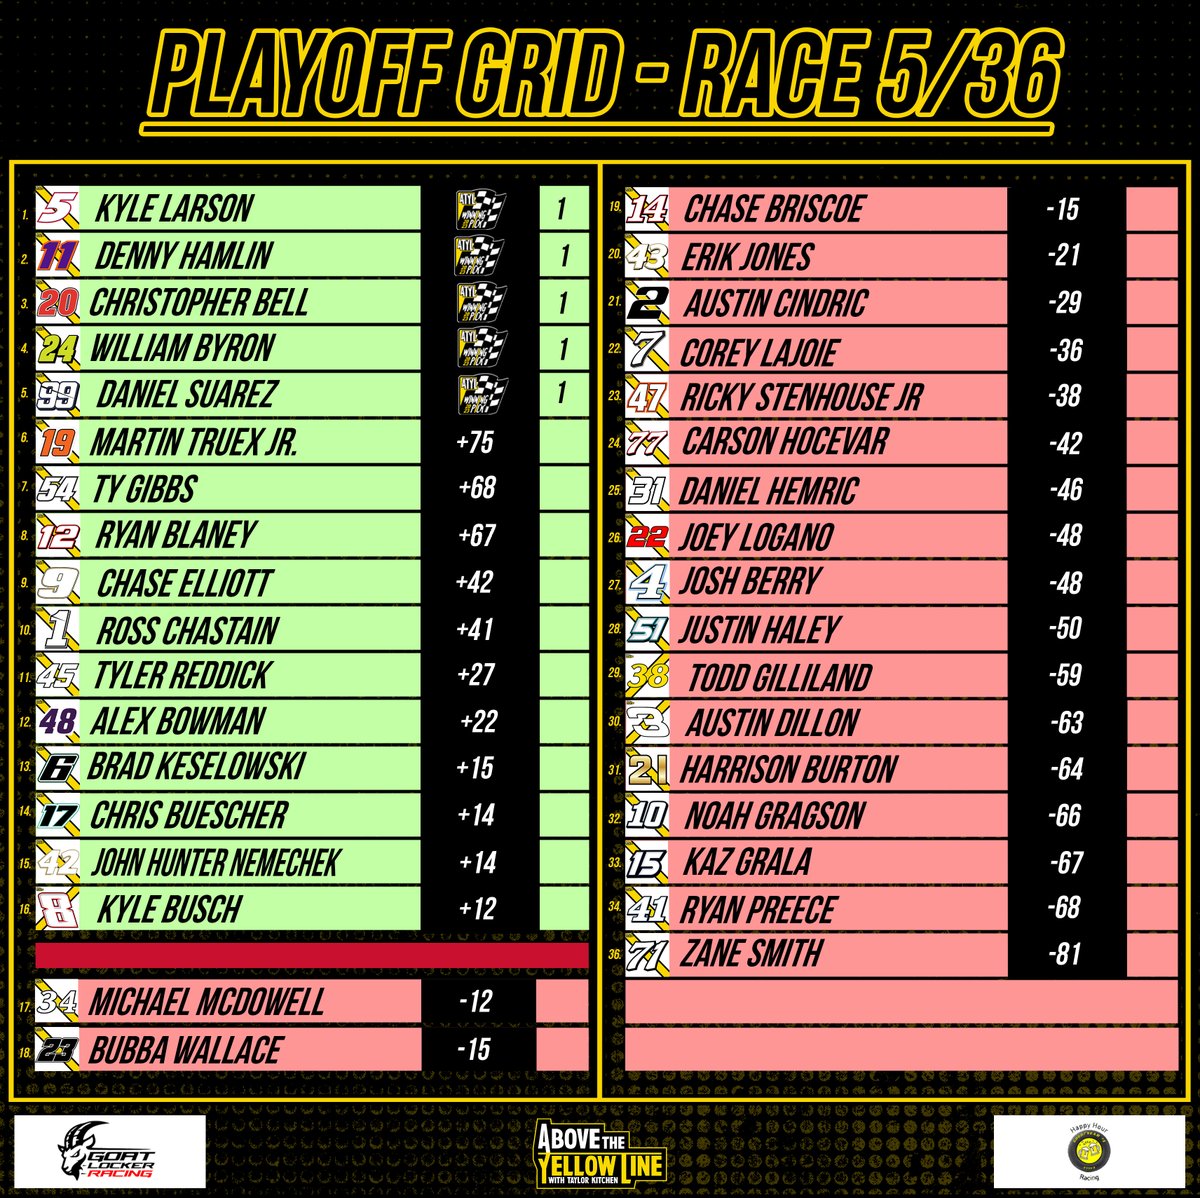 ICYMI: Results and Playoff Grid following the #FoodCity500